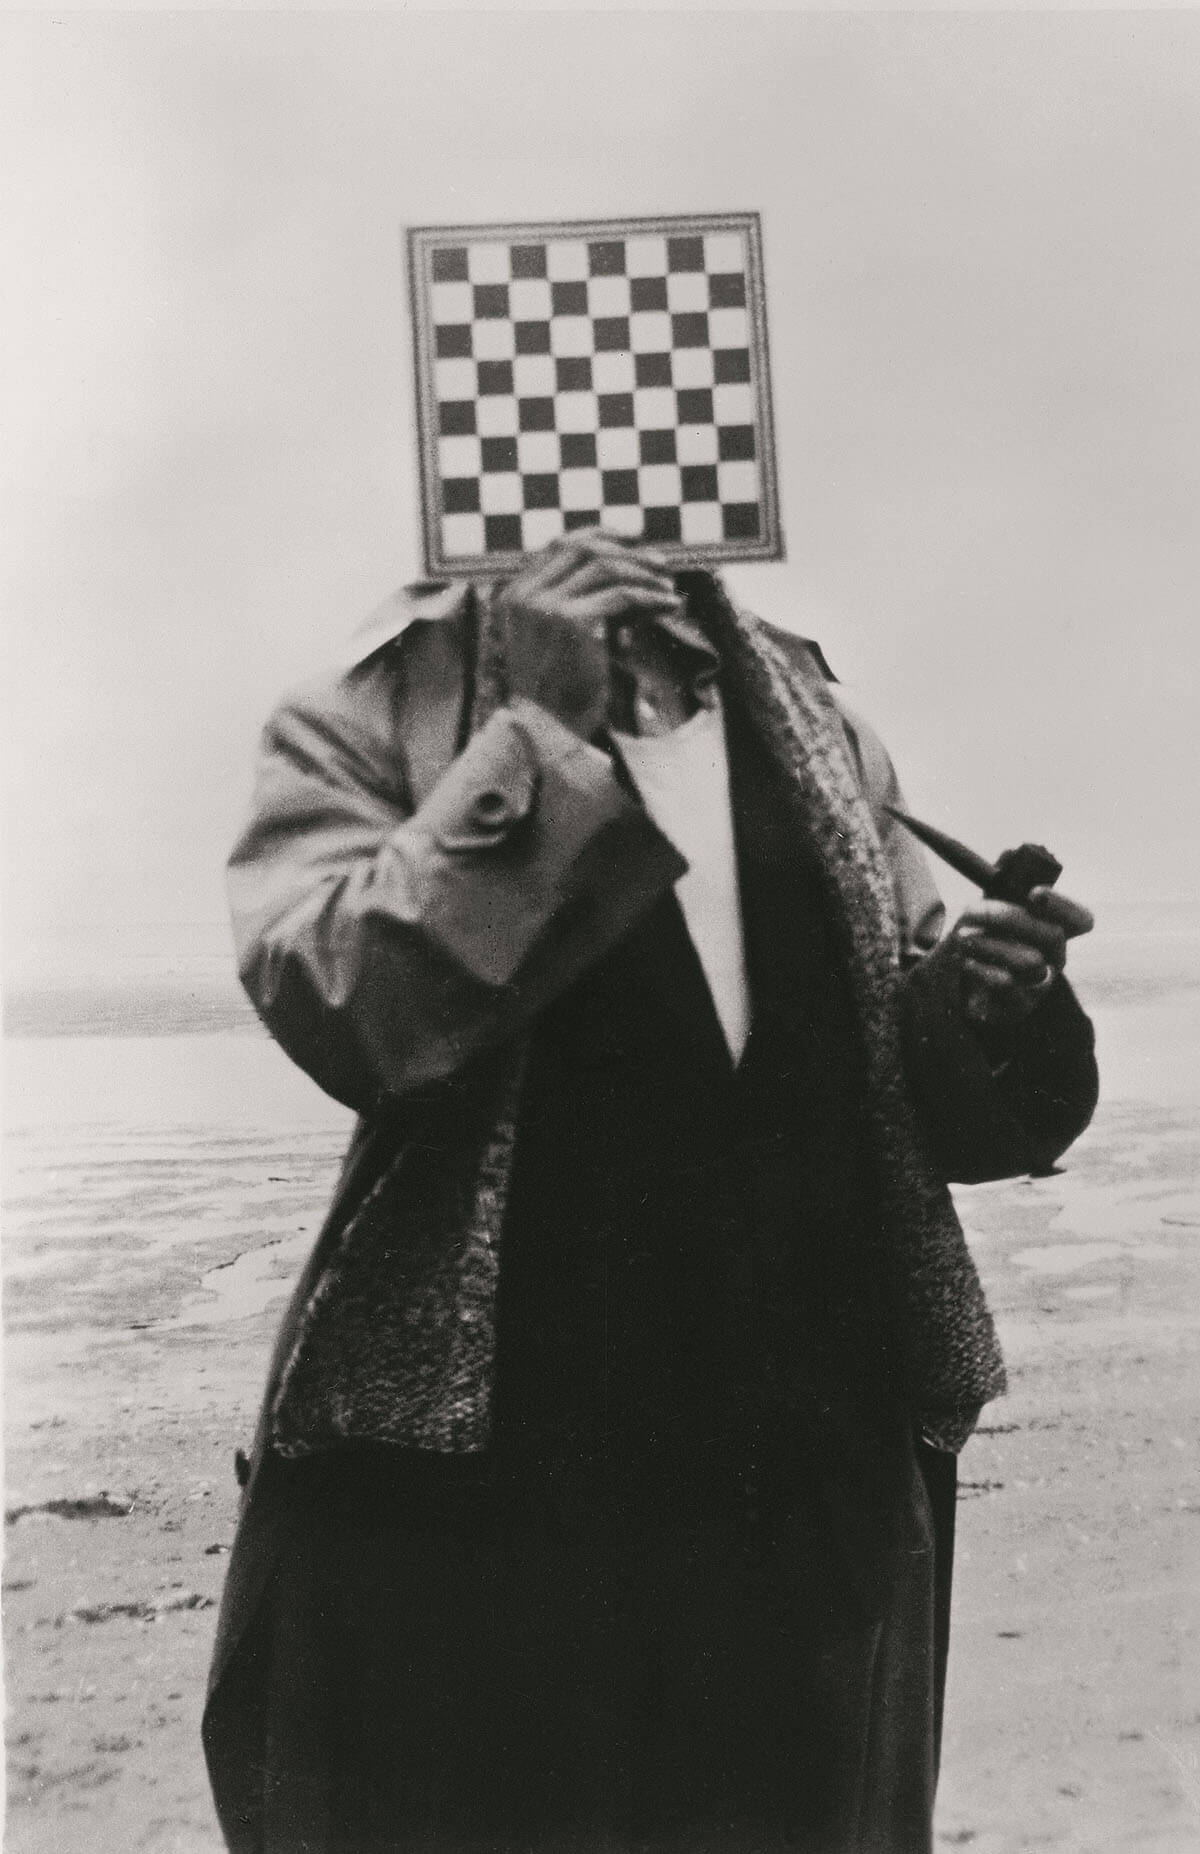 The Giant. Paul Nougé (poet and founder of surrealism in Belgium) on the Belgian Coast (1937).